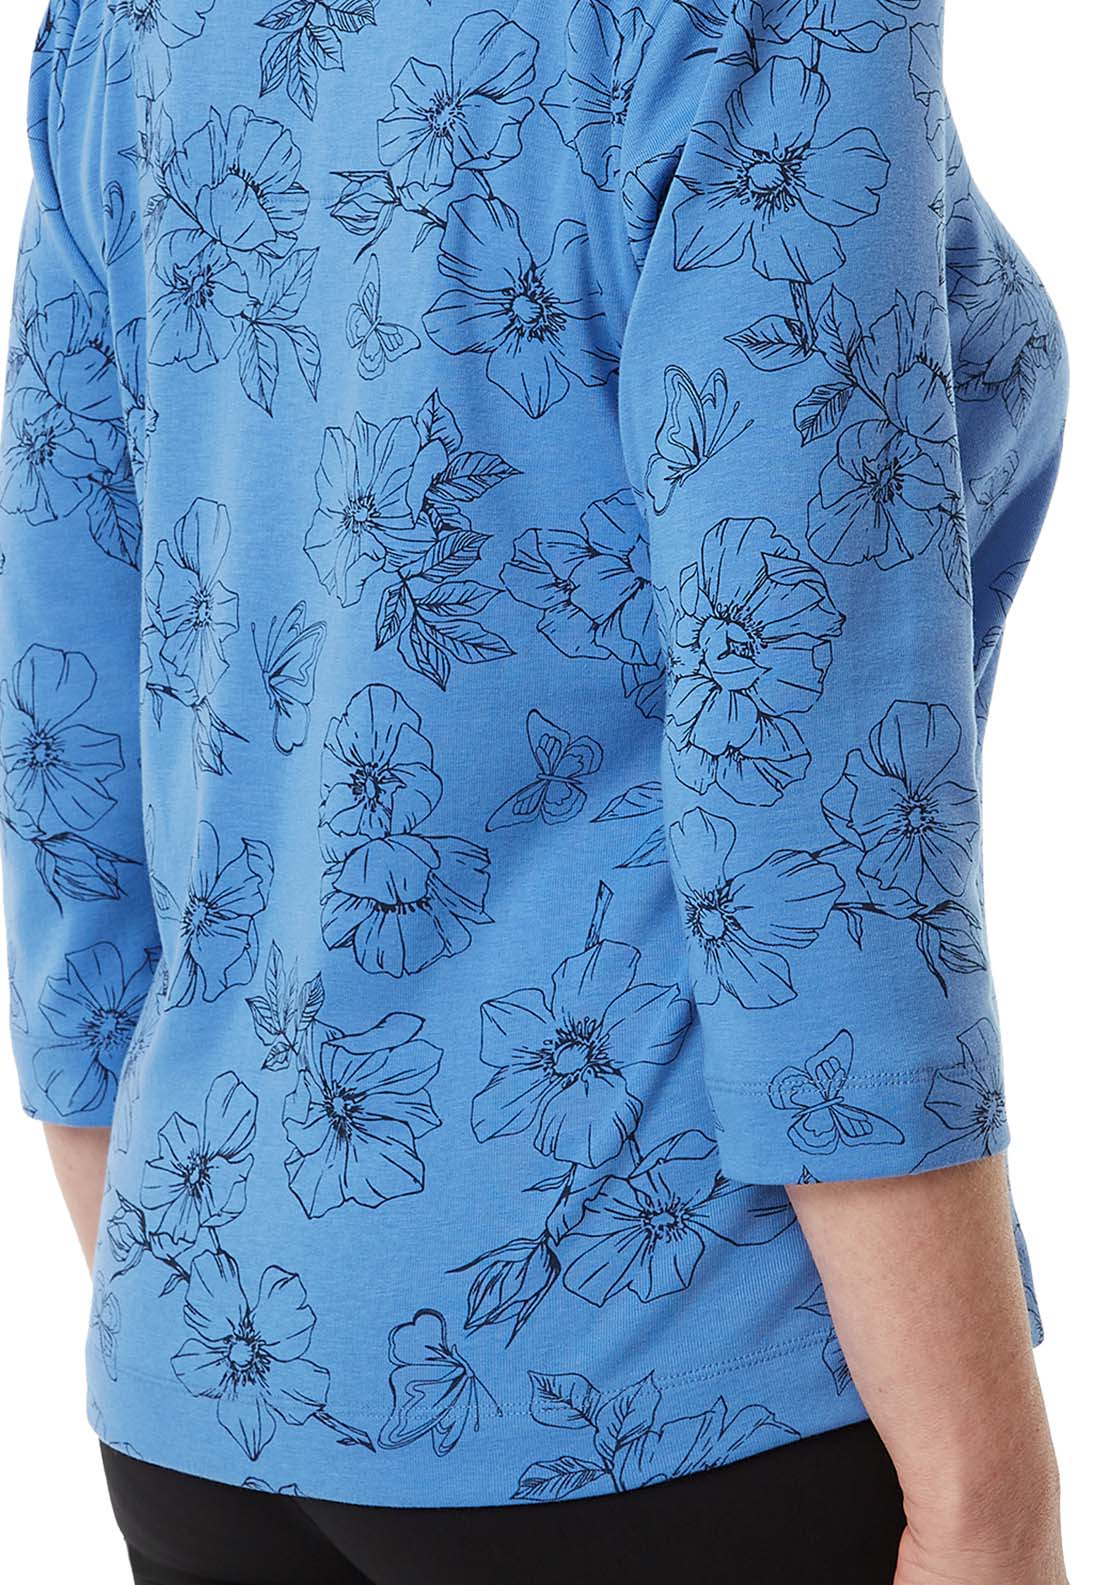 Tigiwear Flora And Butterfly Print Top 4 Shaws Department Stores